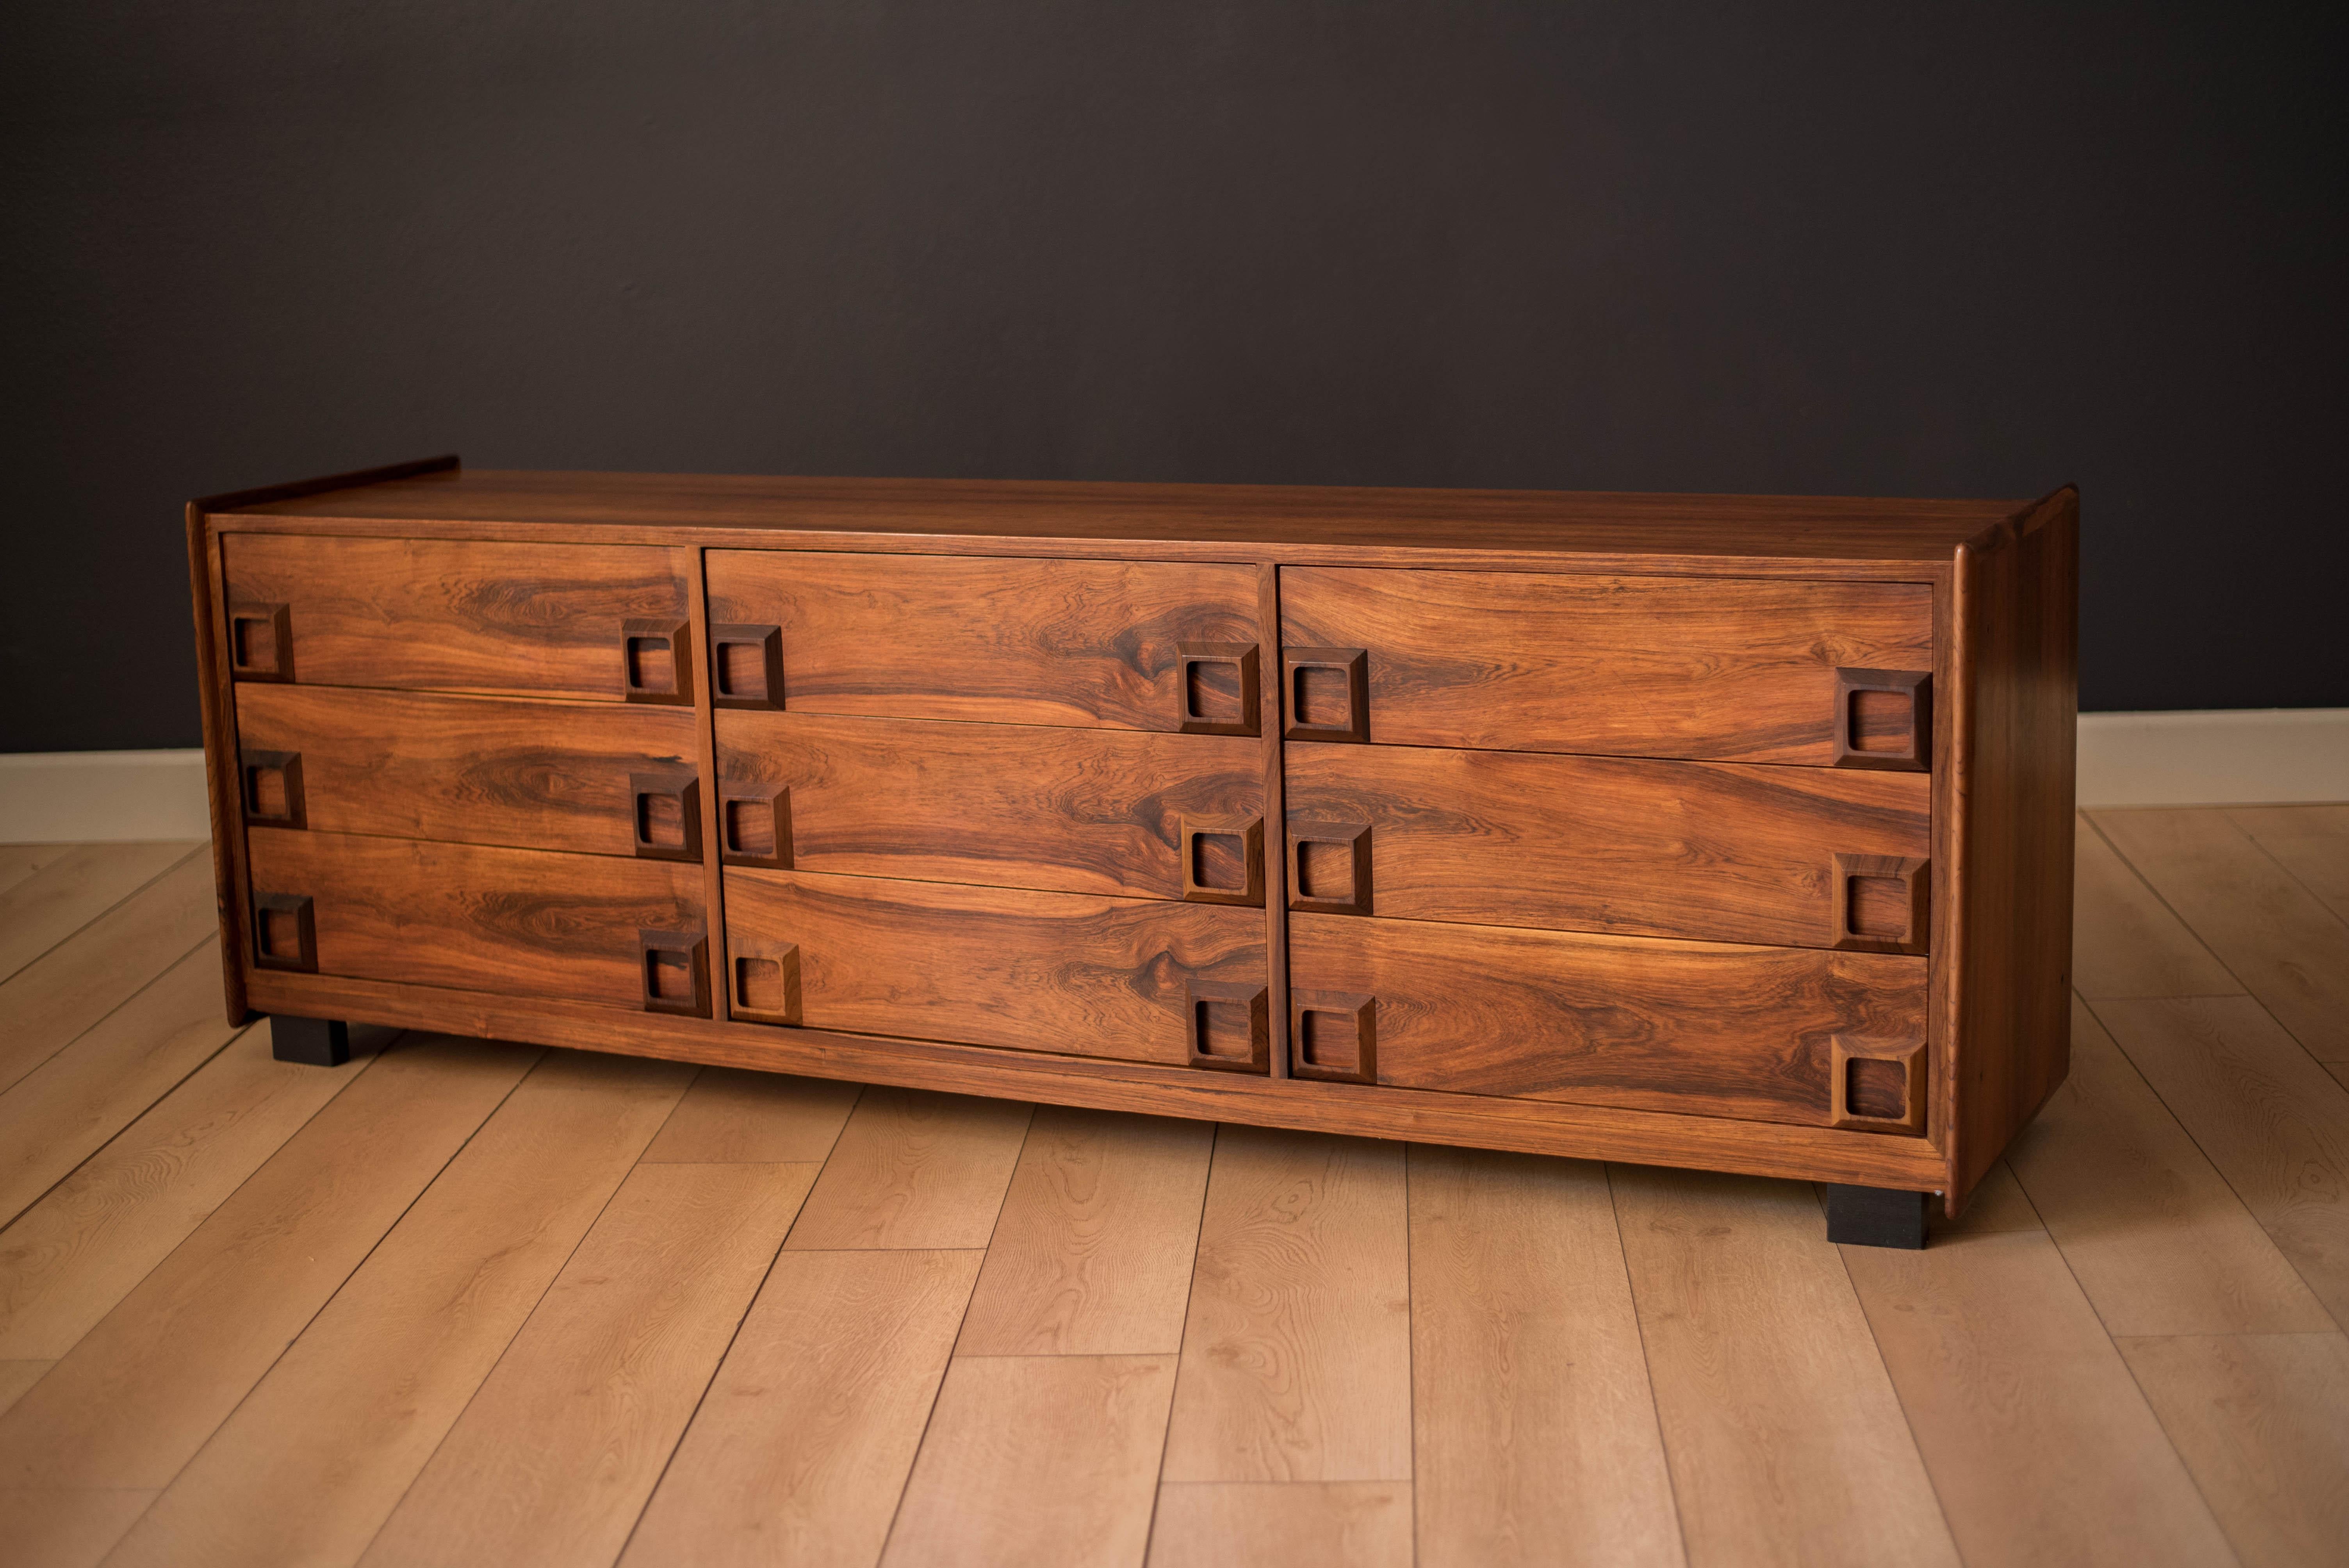 Mid-Century Modern rosewood dresser manufactured by Inter-Continental Design Limited, Canada. This piece features nine dovetailed drawers with sculpted modernist handles. Displays a low profile with external raised edges. Matching pair of